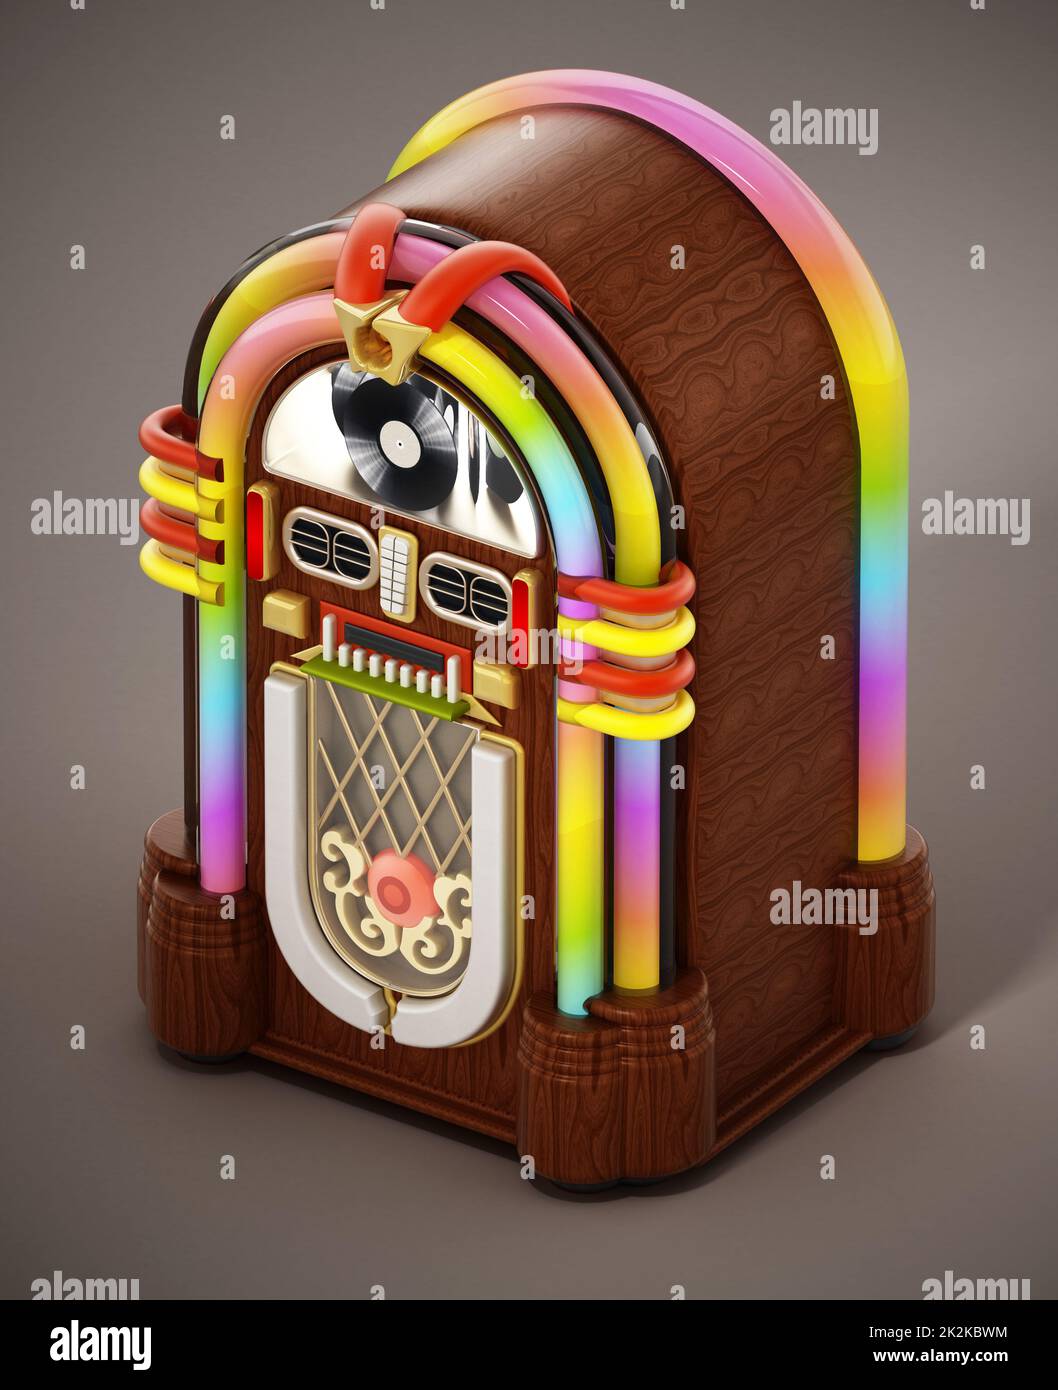 Jukebox standing on brown background. 3D illustration Stock Photo